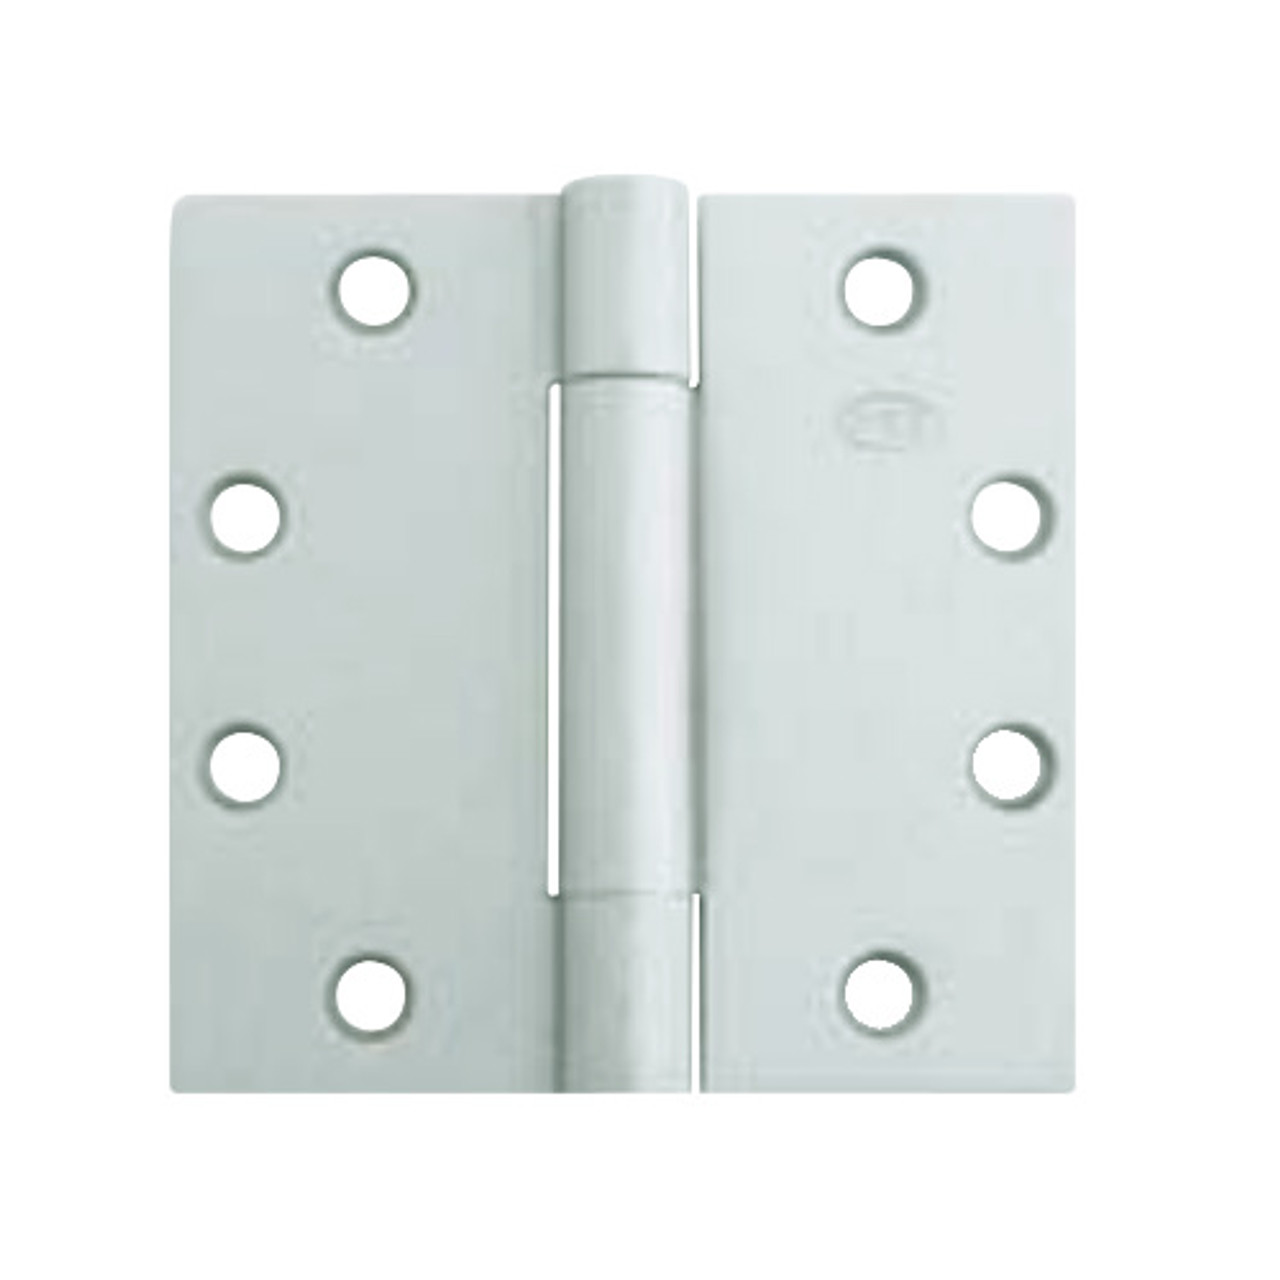 3CB1HW-5x5-646-TW4 IVES 3 Knuckle Concealed Bearing Full Mortise Hinge with Electric Thru-Wire in Satin Nickel Plated